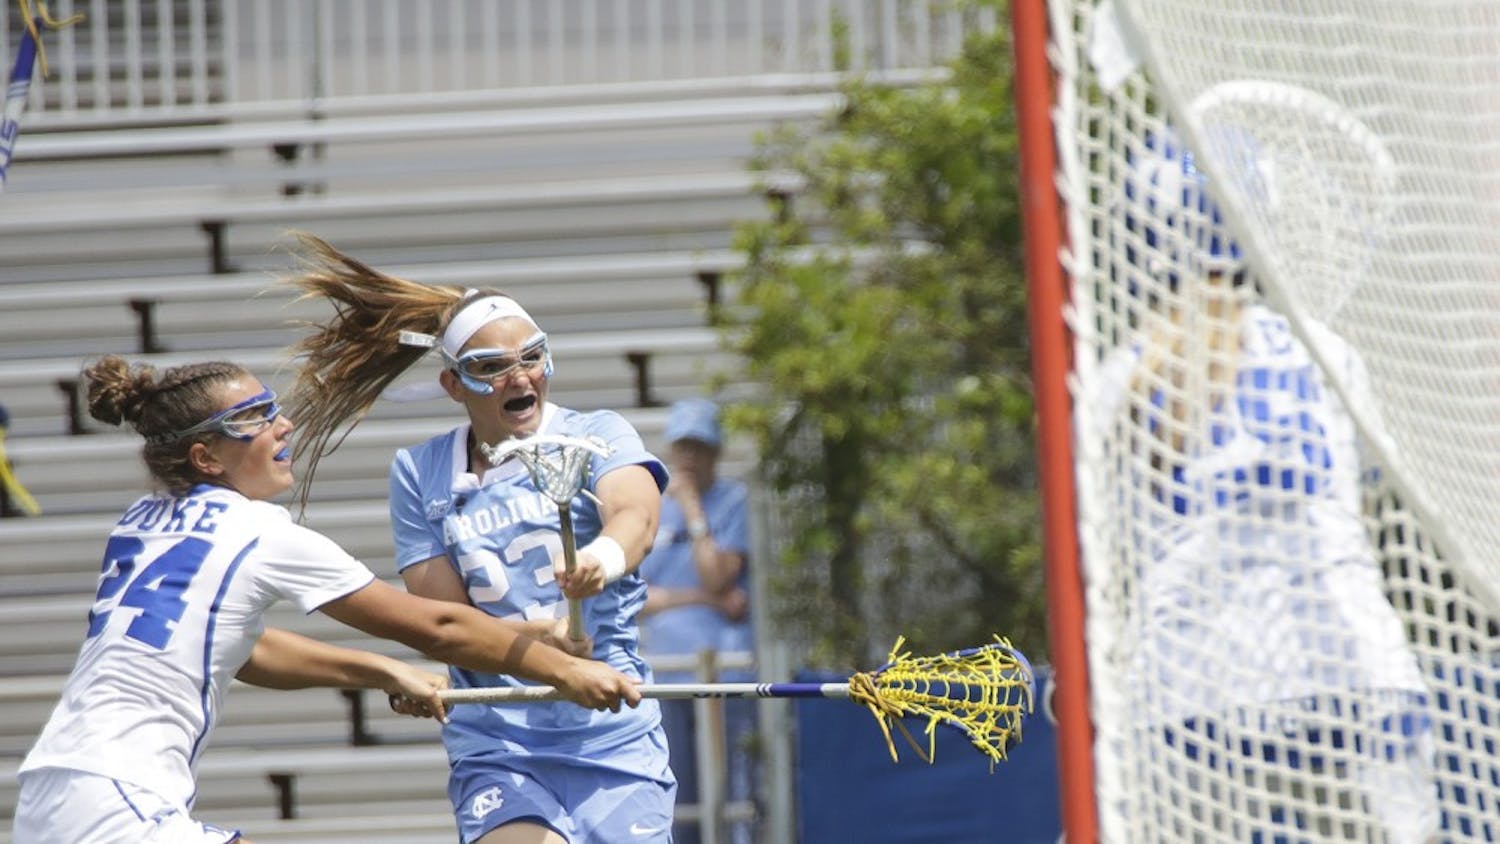 North Carolina women's lacrosse team attacker Molly Hendrick&nbsp;shoots against Duke on April 22. Hendrick finished with a career-high seven goals in both this game and UNC's ACC&nbsp;Tournament championship win against Syracuse.